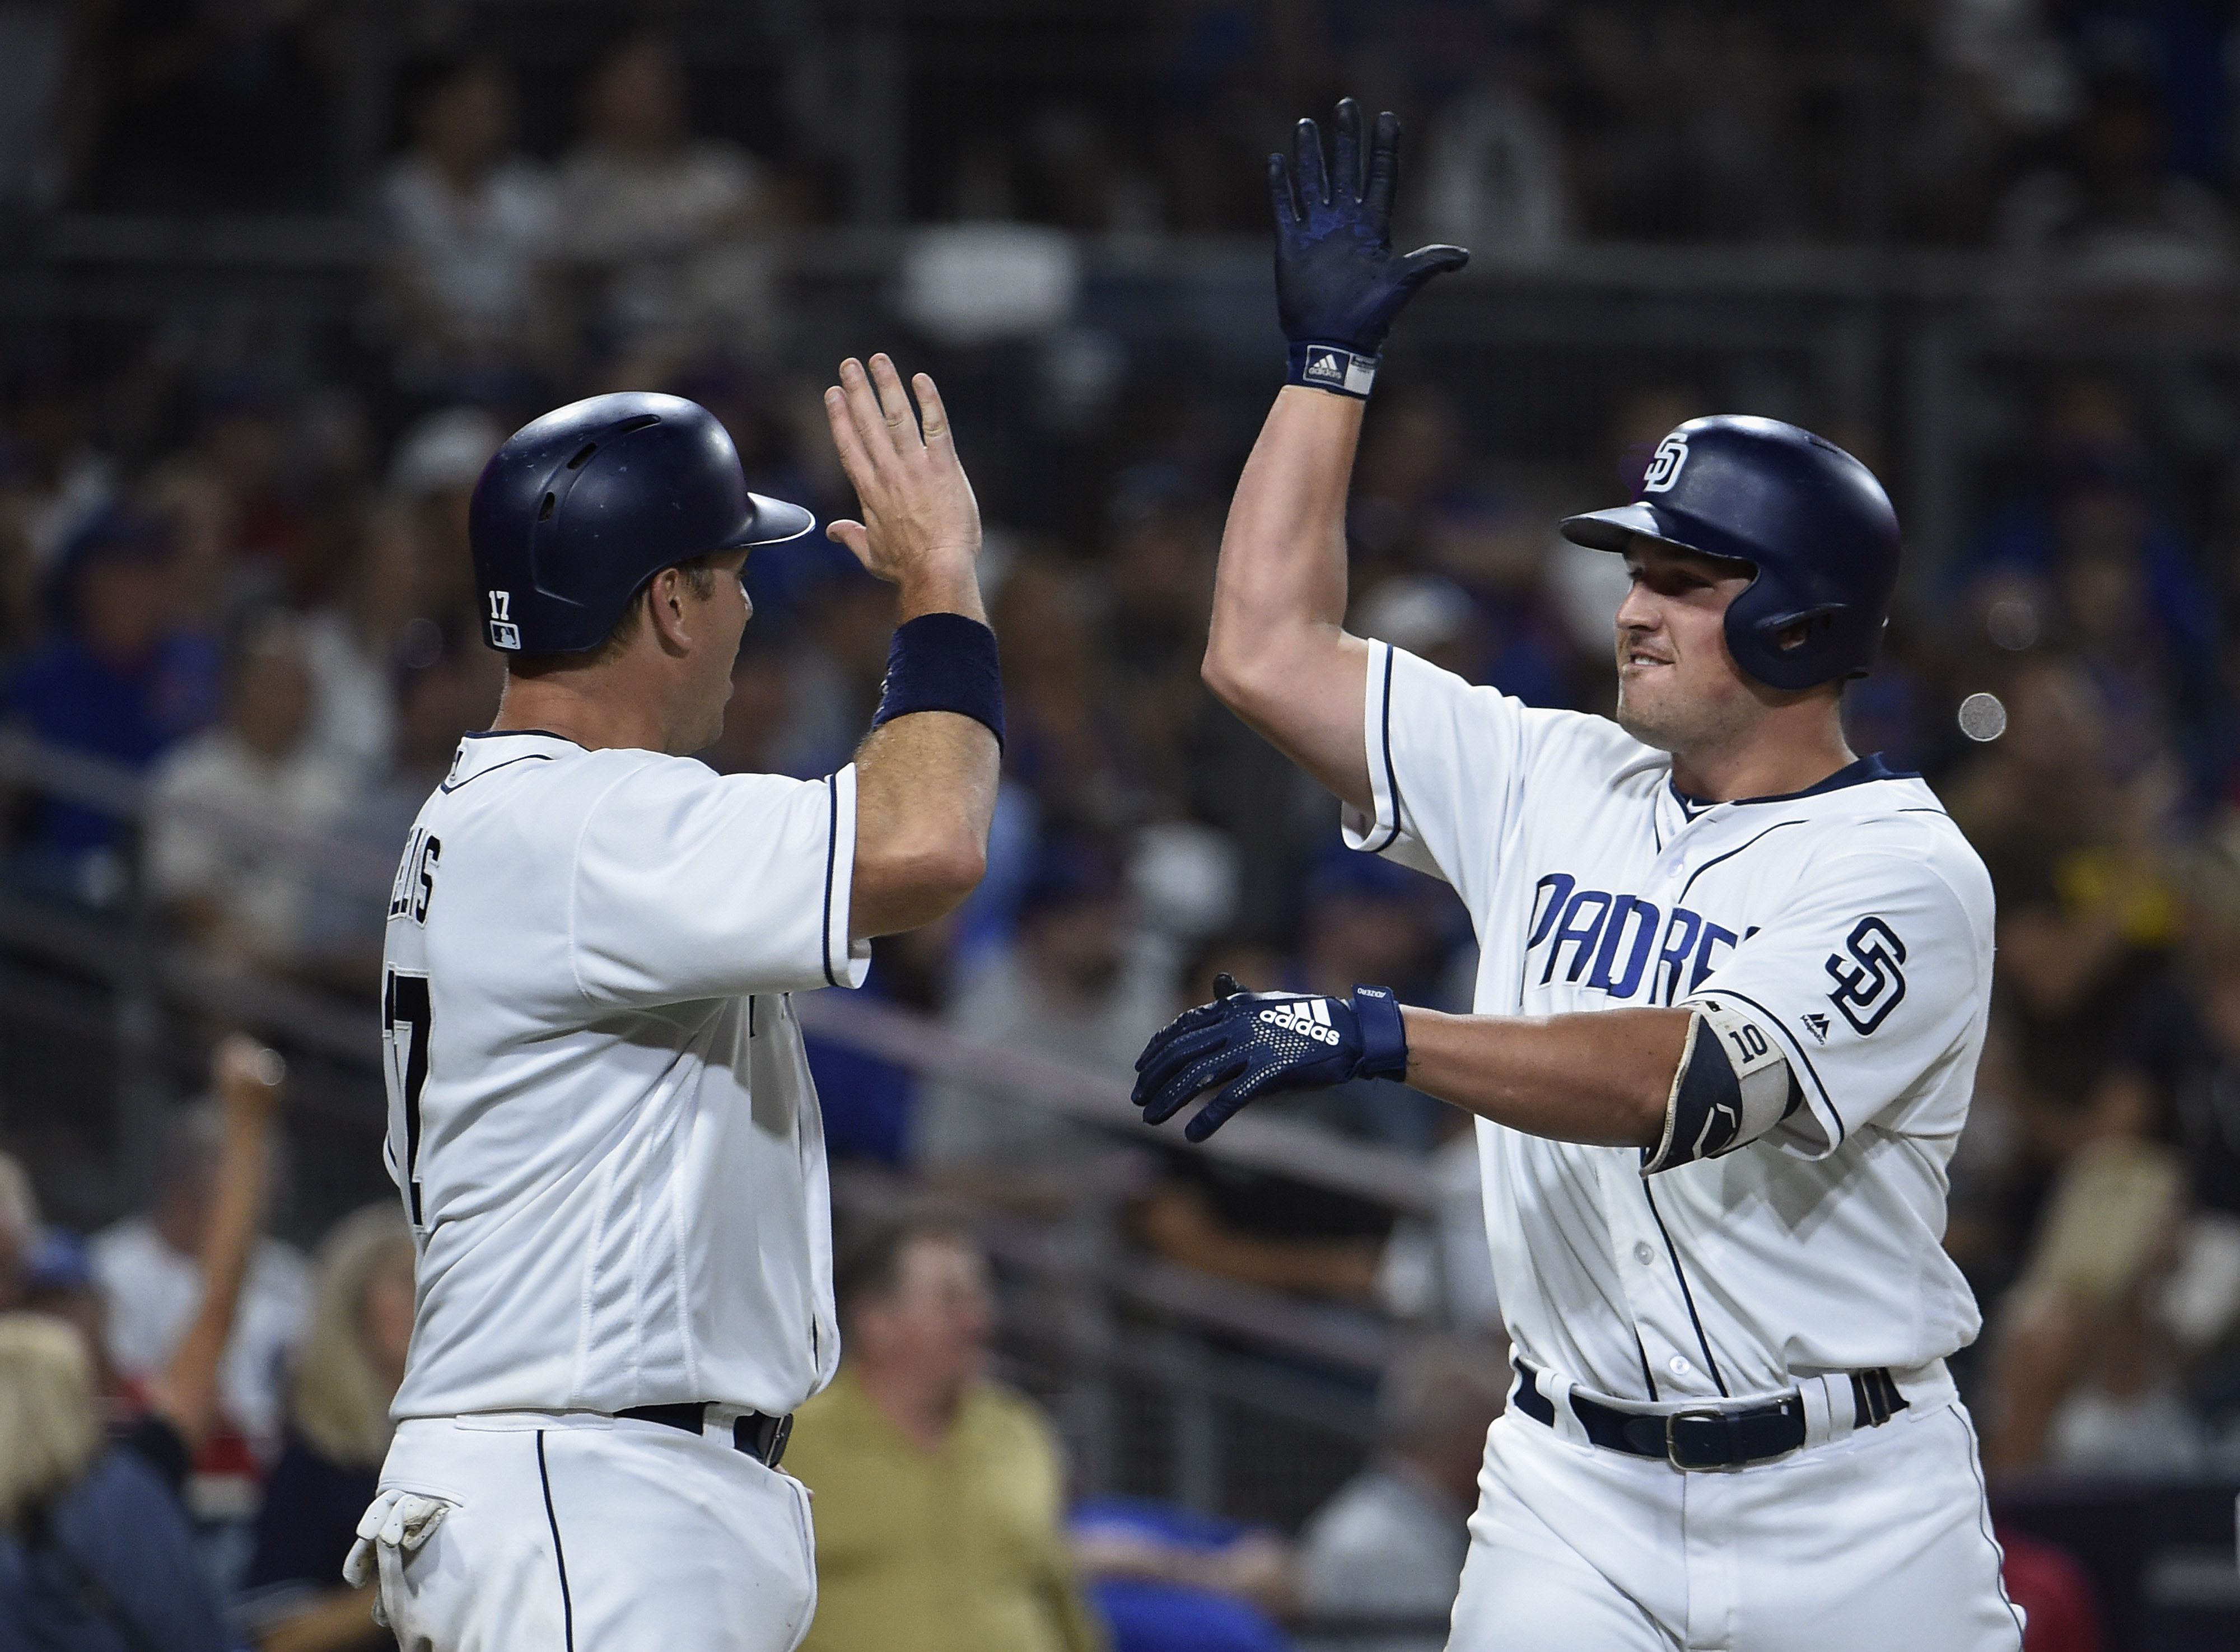 Hunter Renfroe #10 of the San Diego Padres is congratulated by A.J. Ellis #17 after hitting a two-run home run during the seventh inning of a baseball game against the San Diego Padres at PETCO Park on July 14, 2018 in San Diego, California. (Denis Poroy&mdash;Getty Images)